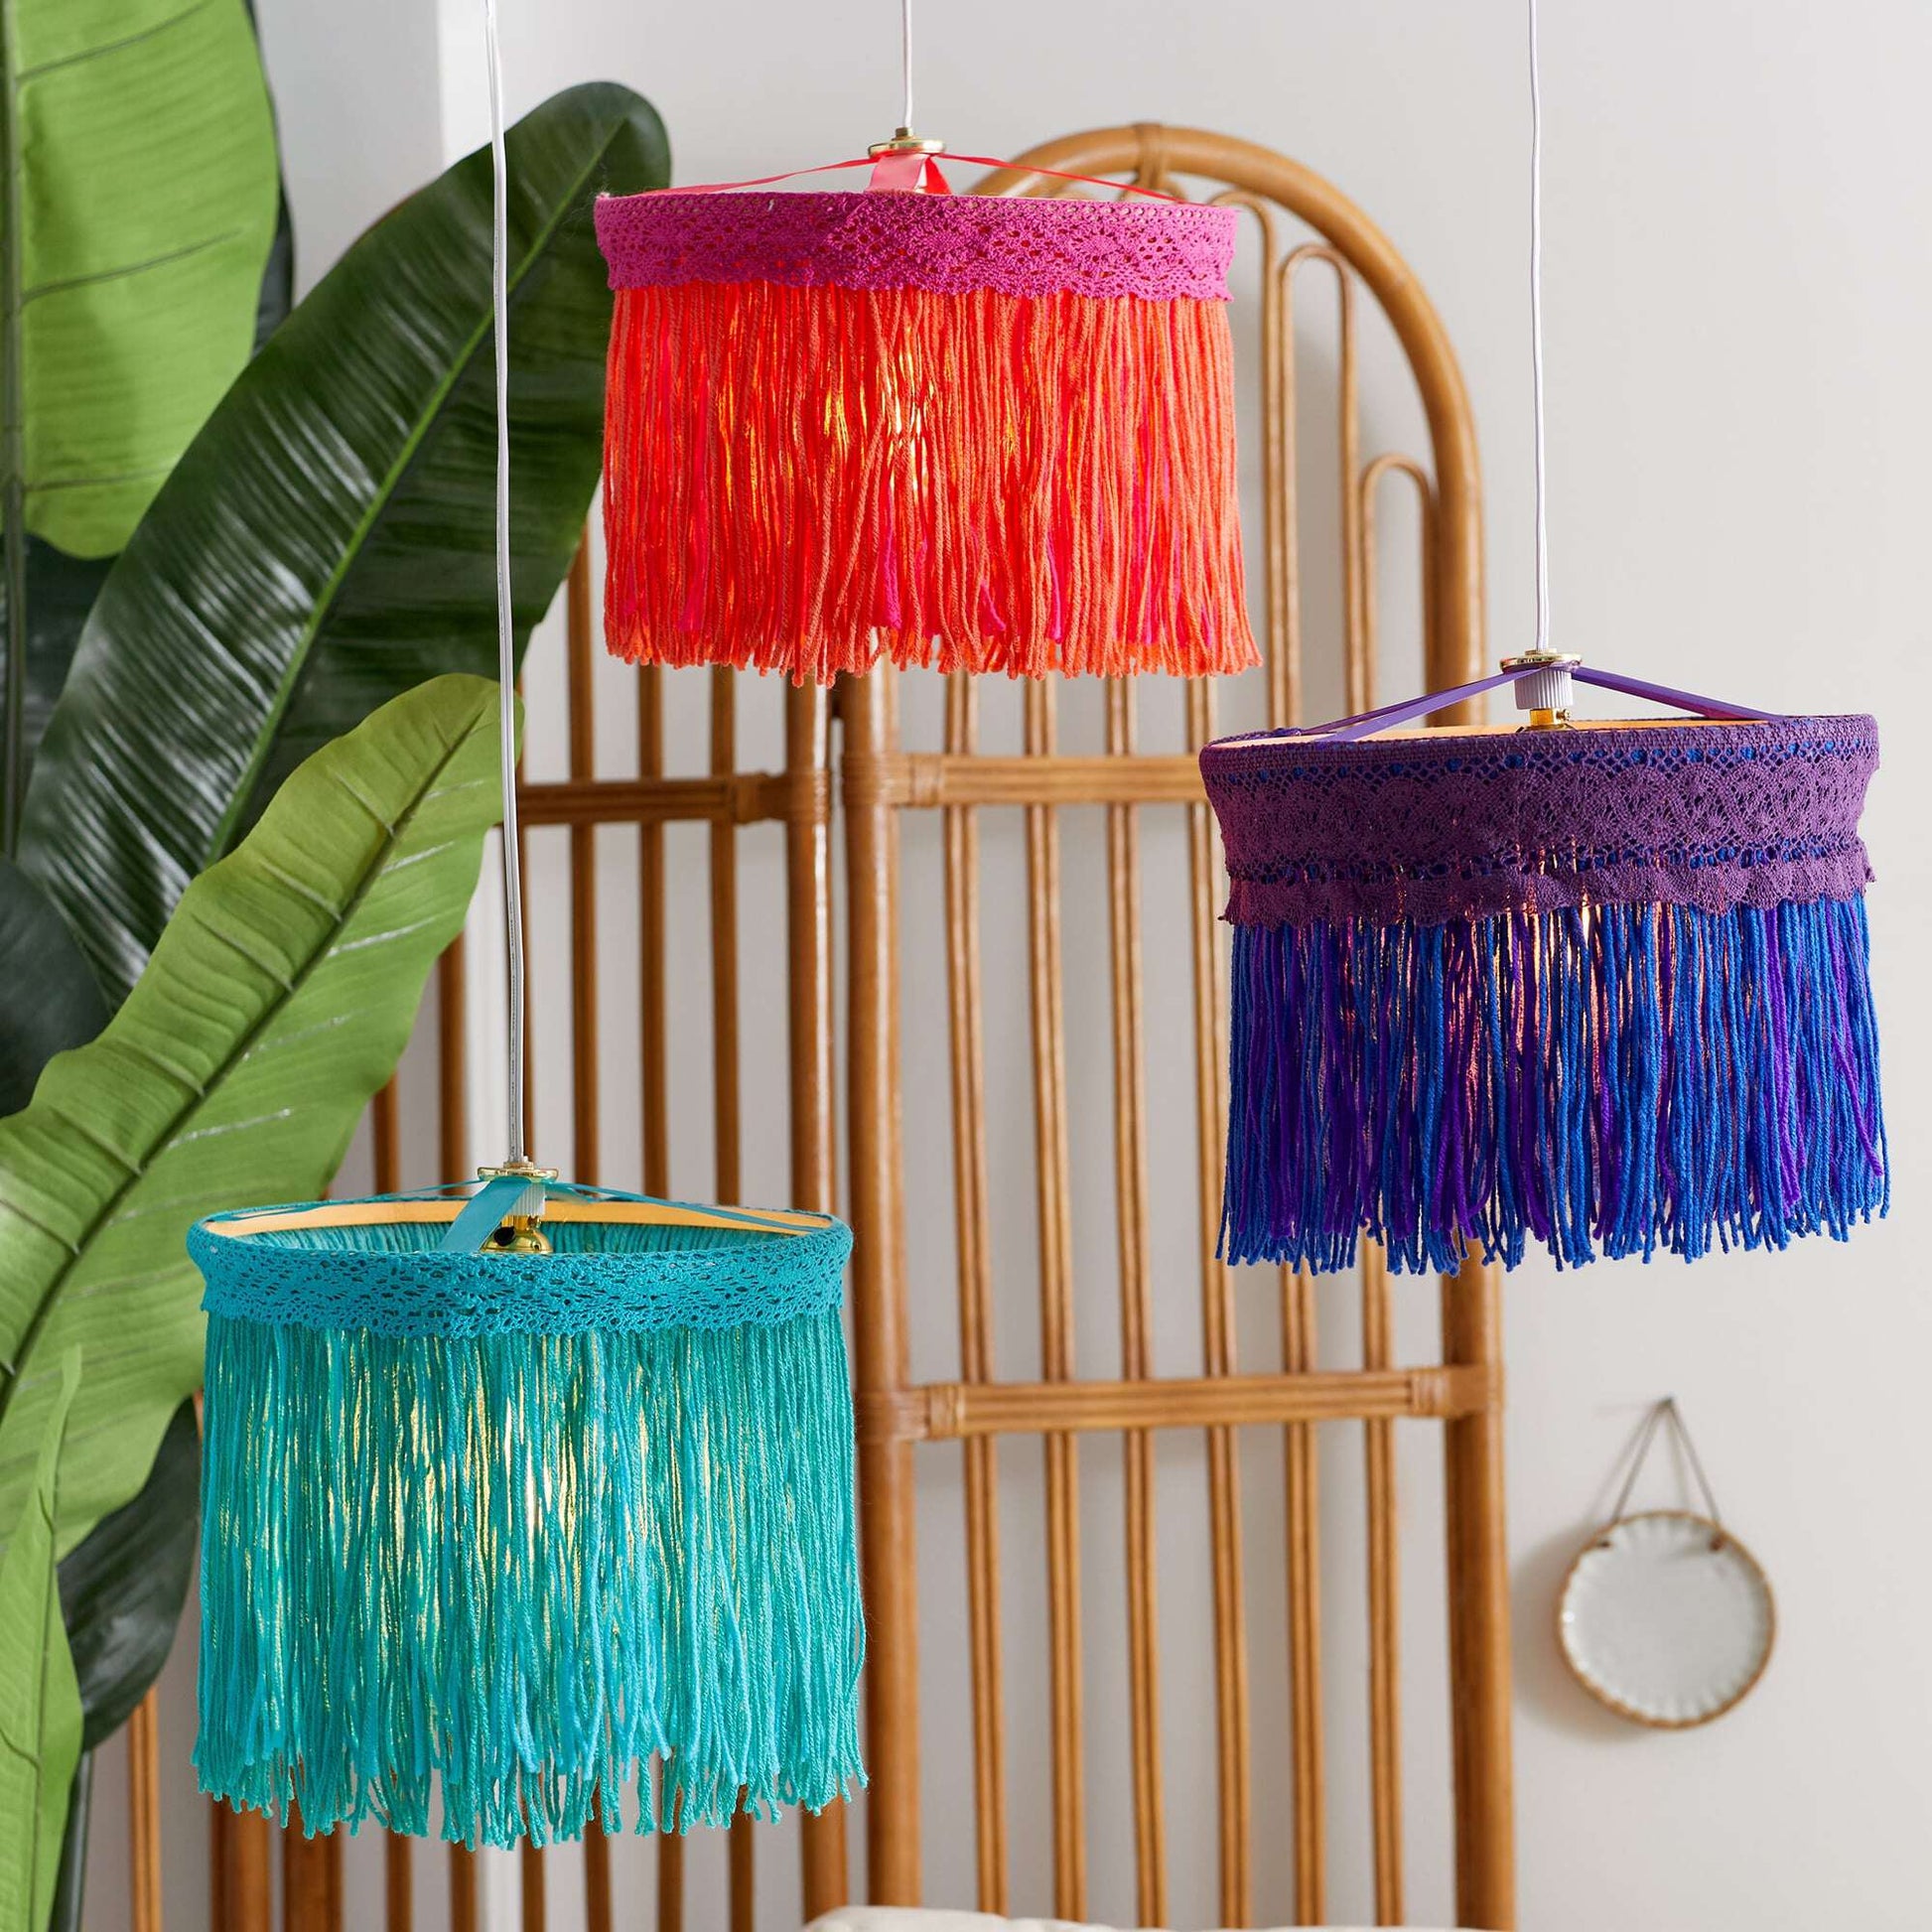 Free Red Heart Groovy Lampshades Craft Pattern